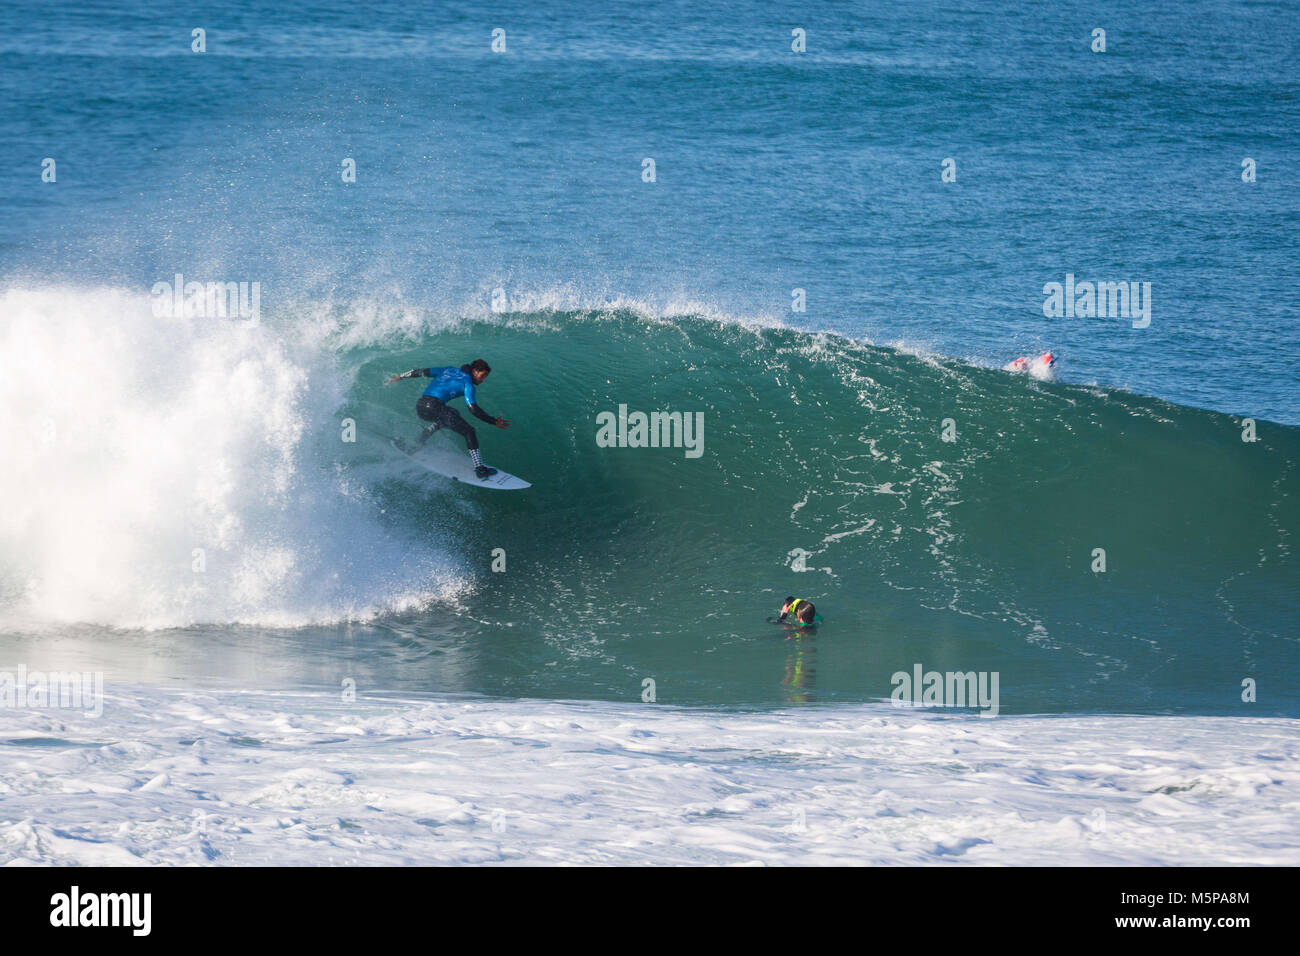 February 24, 2018 - NazarÃ, Leiria, Portugal - Surfer: Lucas Chianca, Brazilian seen at the CapÃtulo Perfeito event...An event that brings together some of the best free surfers in the country and the world in a tube competition at Praia do Norte, NazarÃ©. It happened on the 24th of February and the winner was William Aliotti. (Credit Image: © Capitulo Perfeito-007.jpg/SOPA Images via ZUMA Wire) Stock Photo